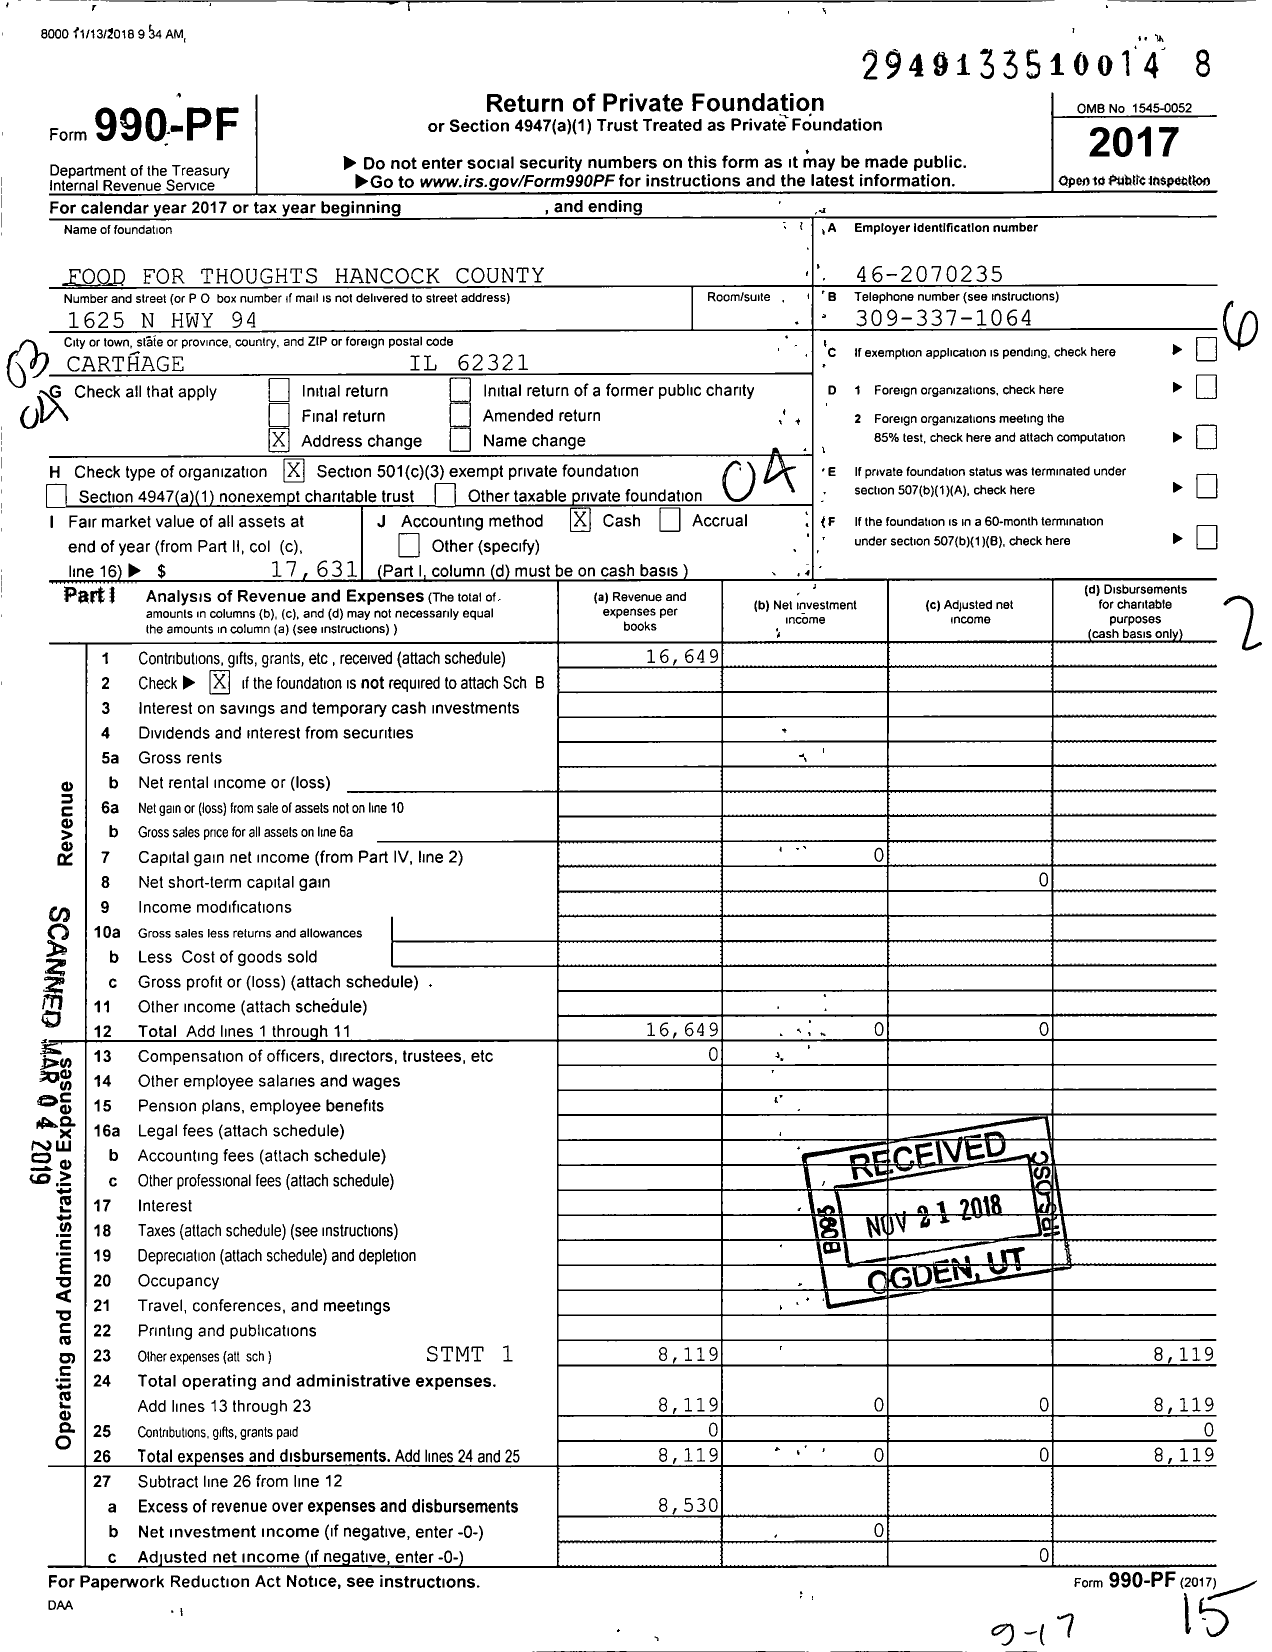 Image of first page of 2017 Form 990PF for Food for Thoughts Hancock County